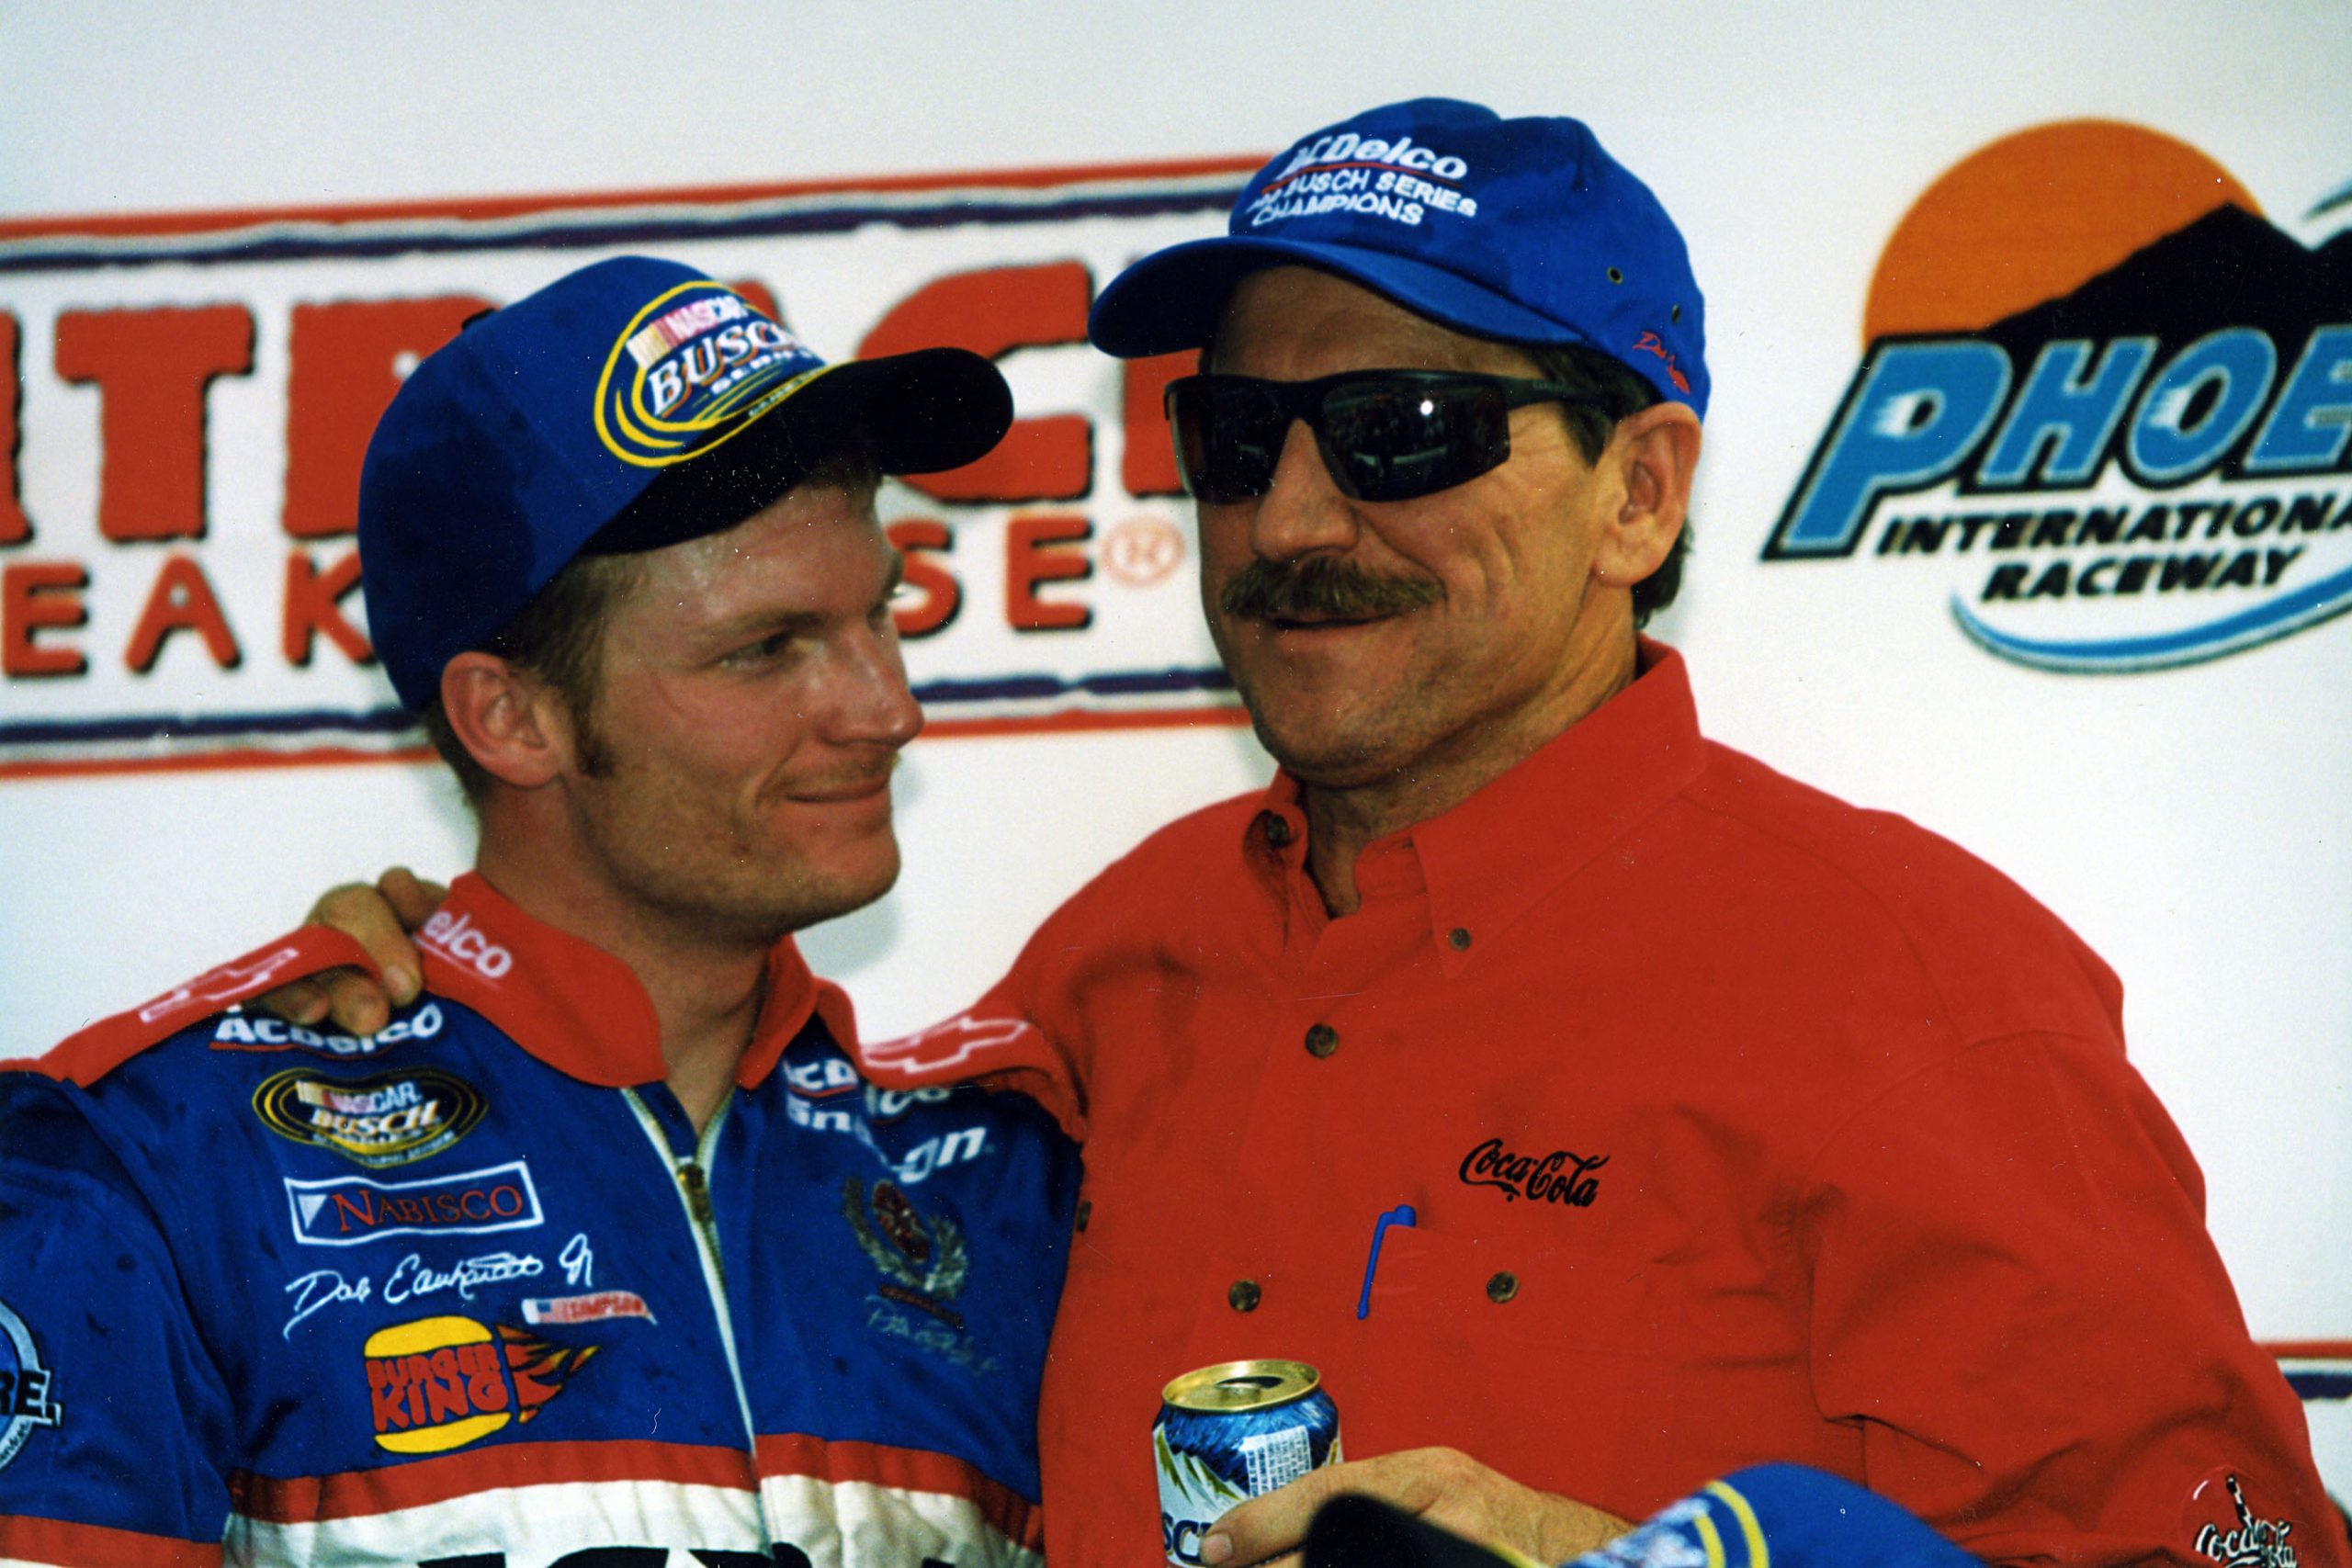 Dale Earnhardt Jr. poses with his father Dale Earnhardt Sr. in 1999.